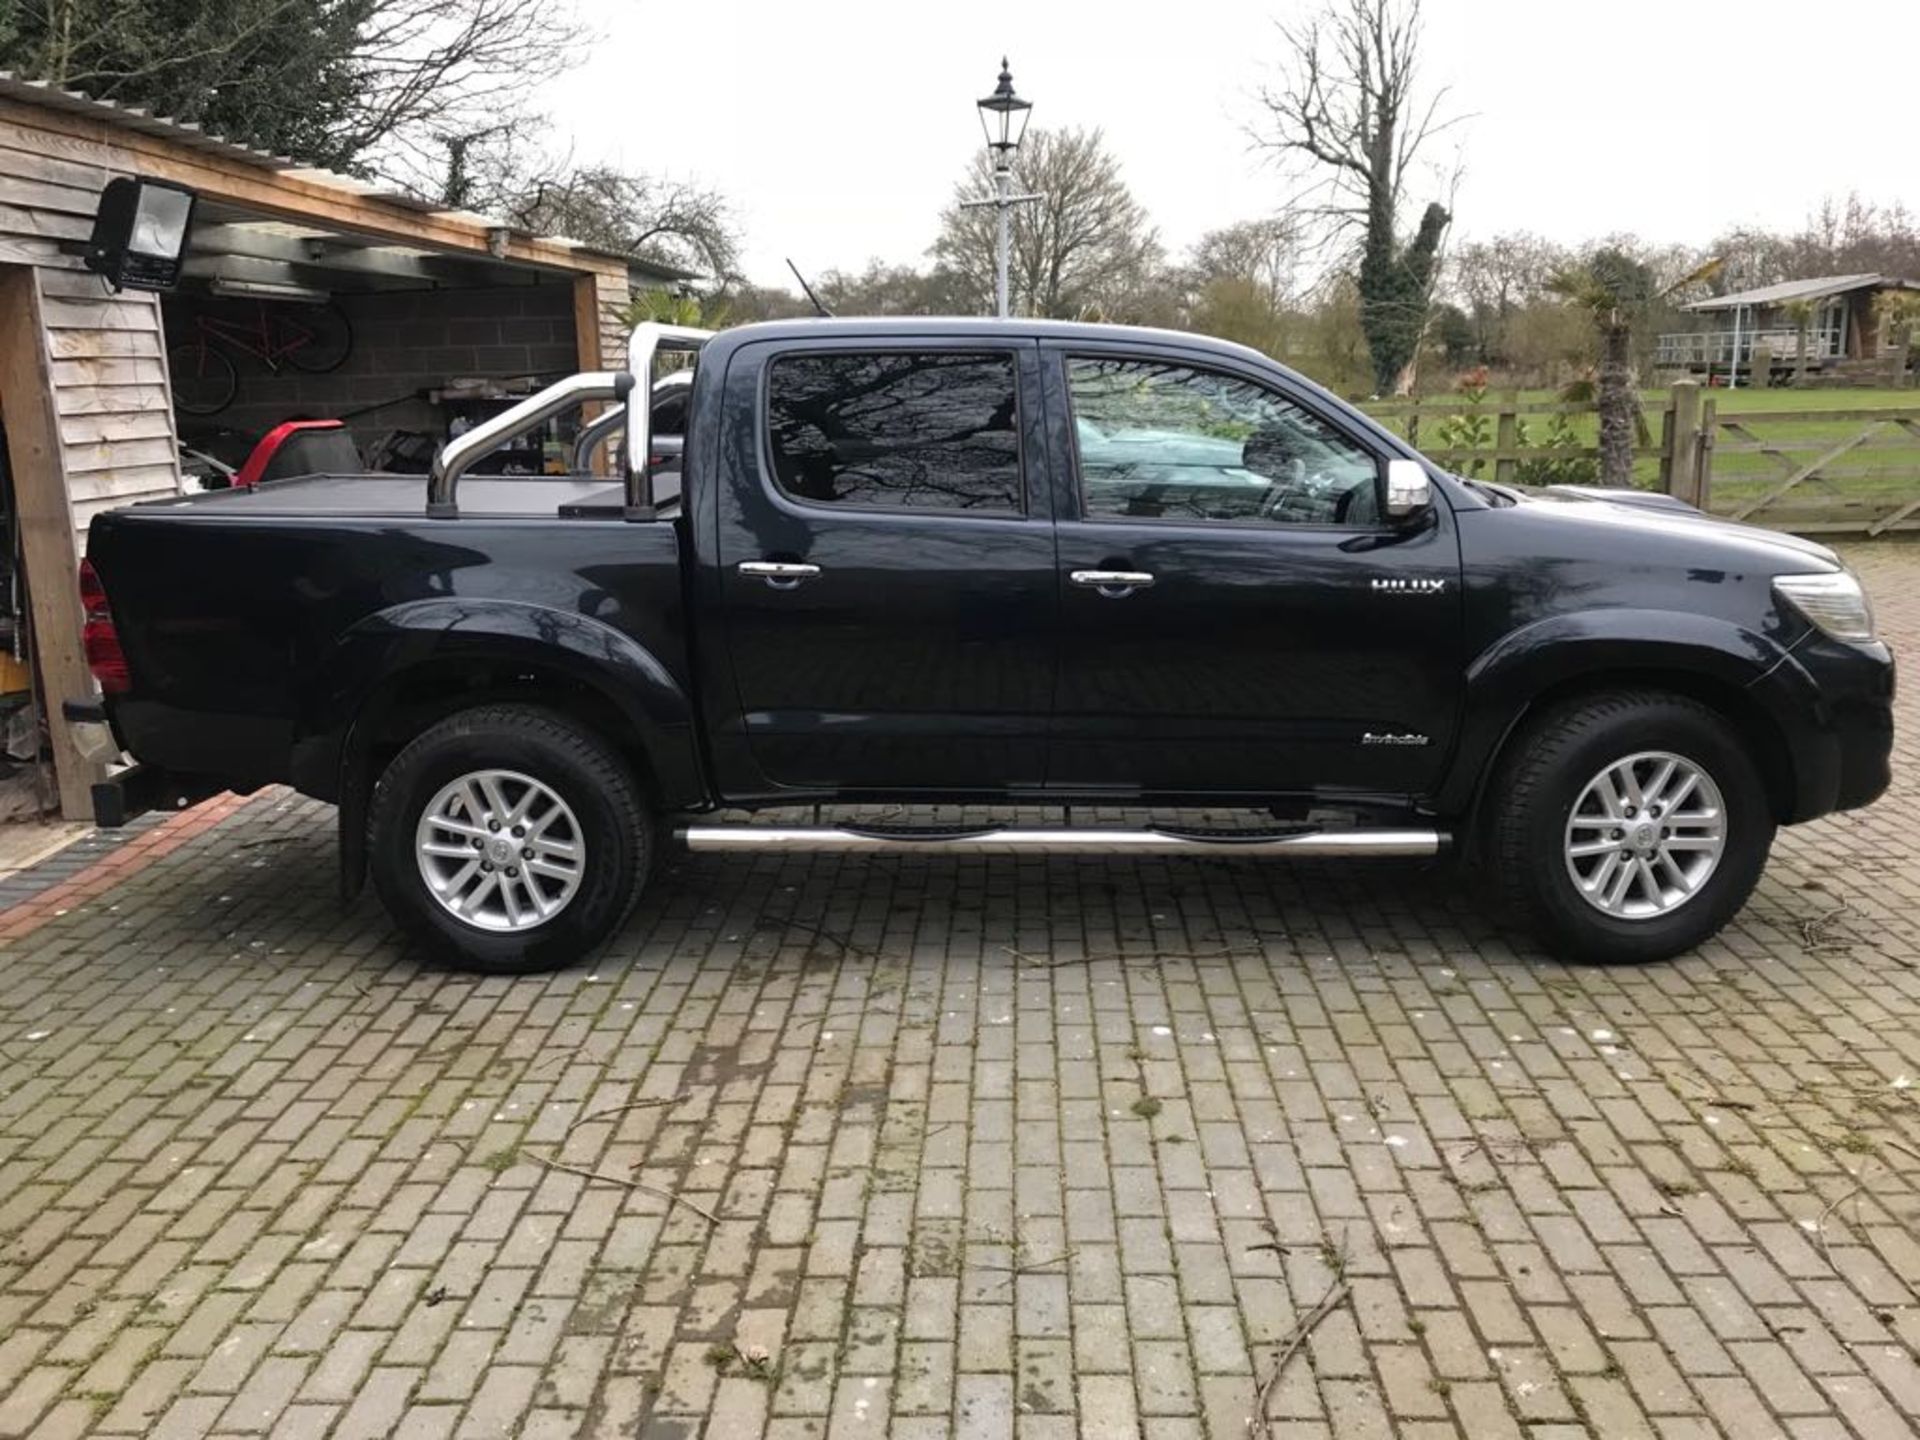 2012/12 REG TOYOTA HILUX INVINCIBLE D-4D 4X4 GREY DIESEL LIGHT 4X4 UTILITY AUTO 1 FORMER KEEPER - Image 8 of 31